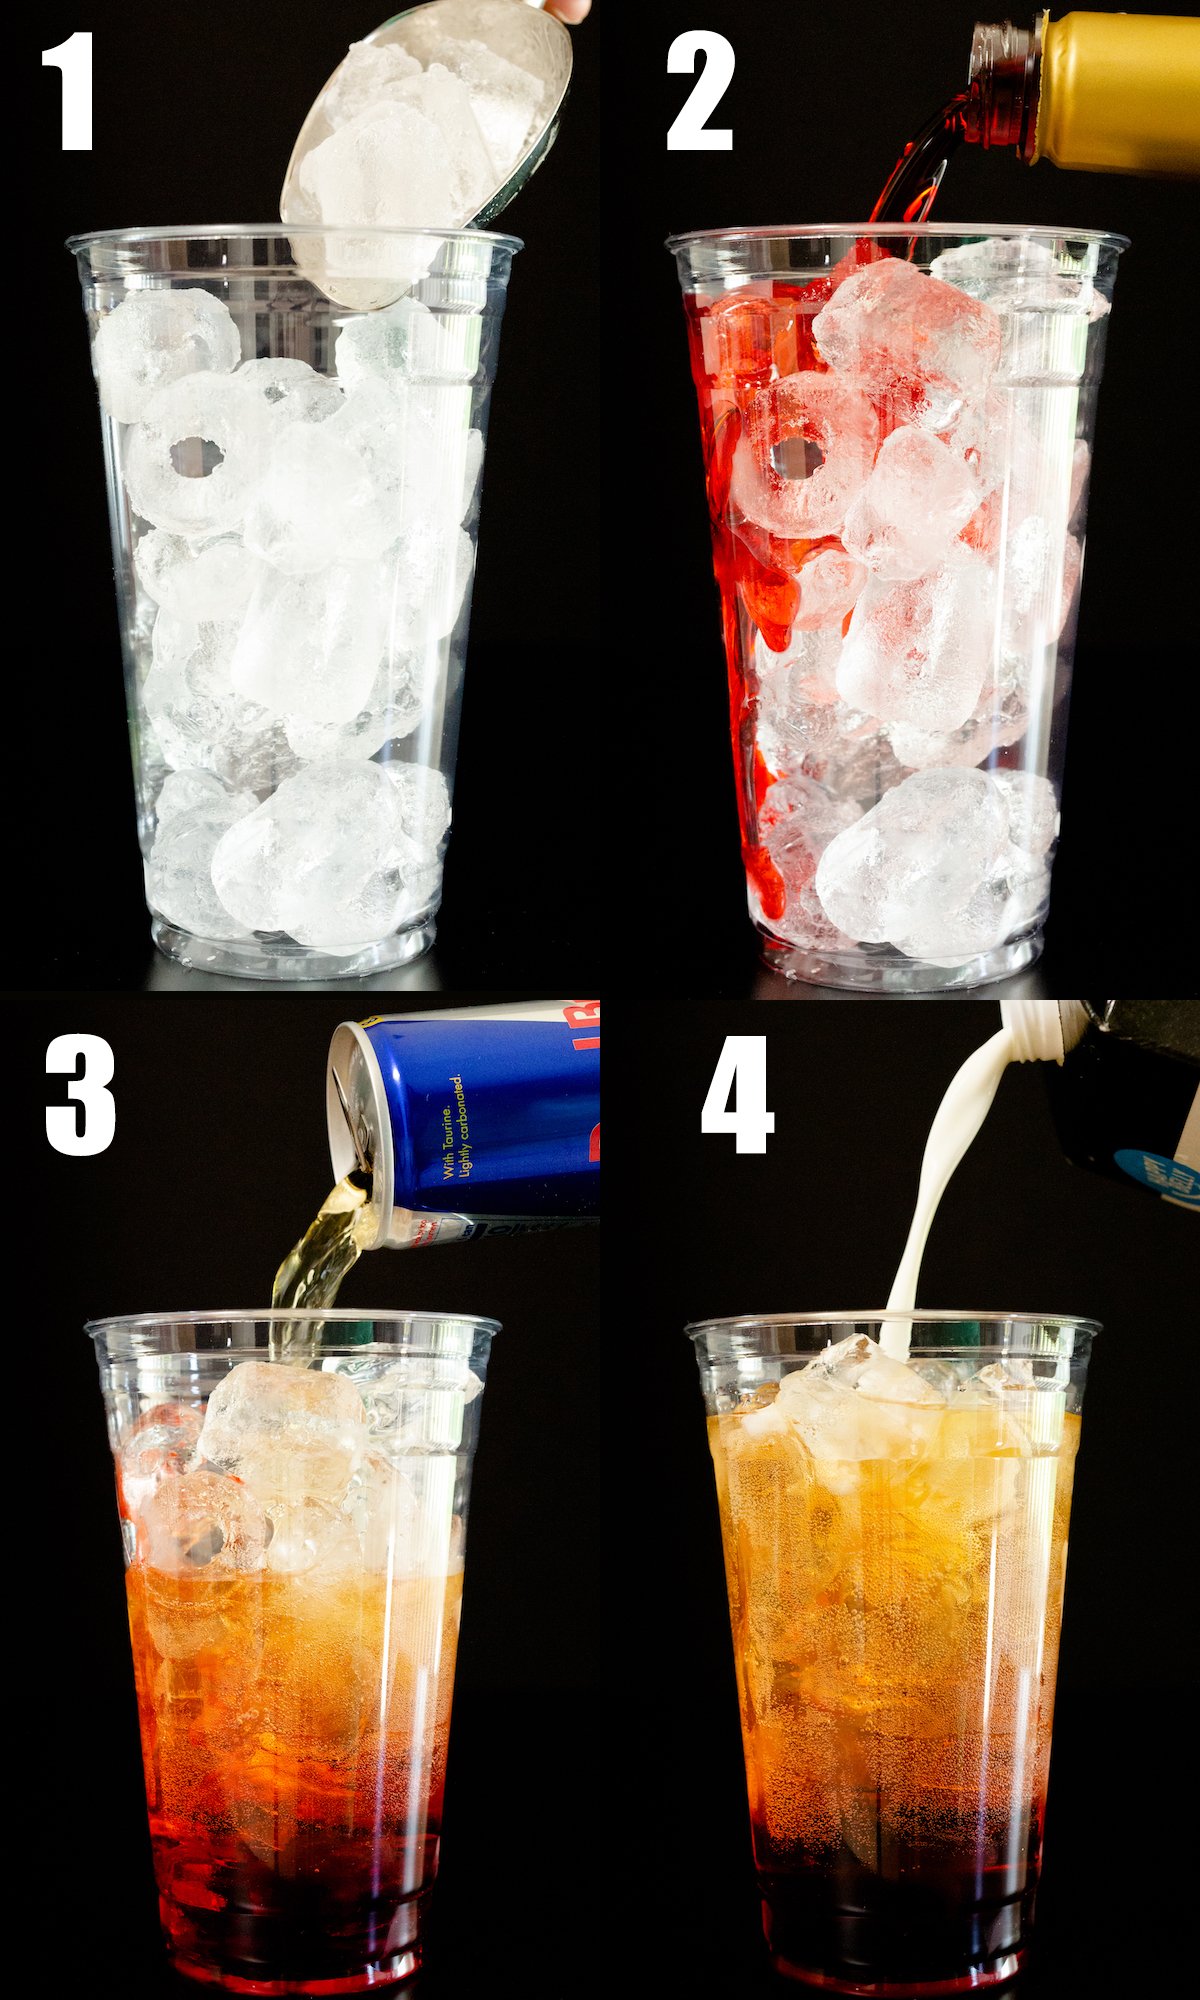 A four photo collage showing how to make a Red Bull Italian Soda 1 - add ice to a large glass, 2 - add flavored syrup, 3 - pour in red bull, 4 - add cream.